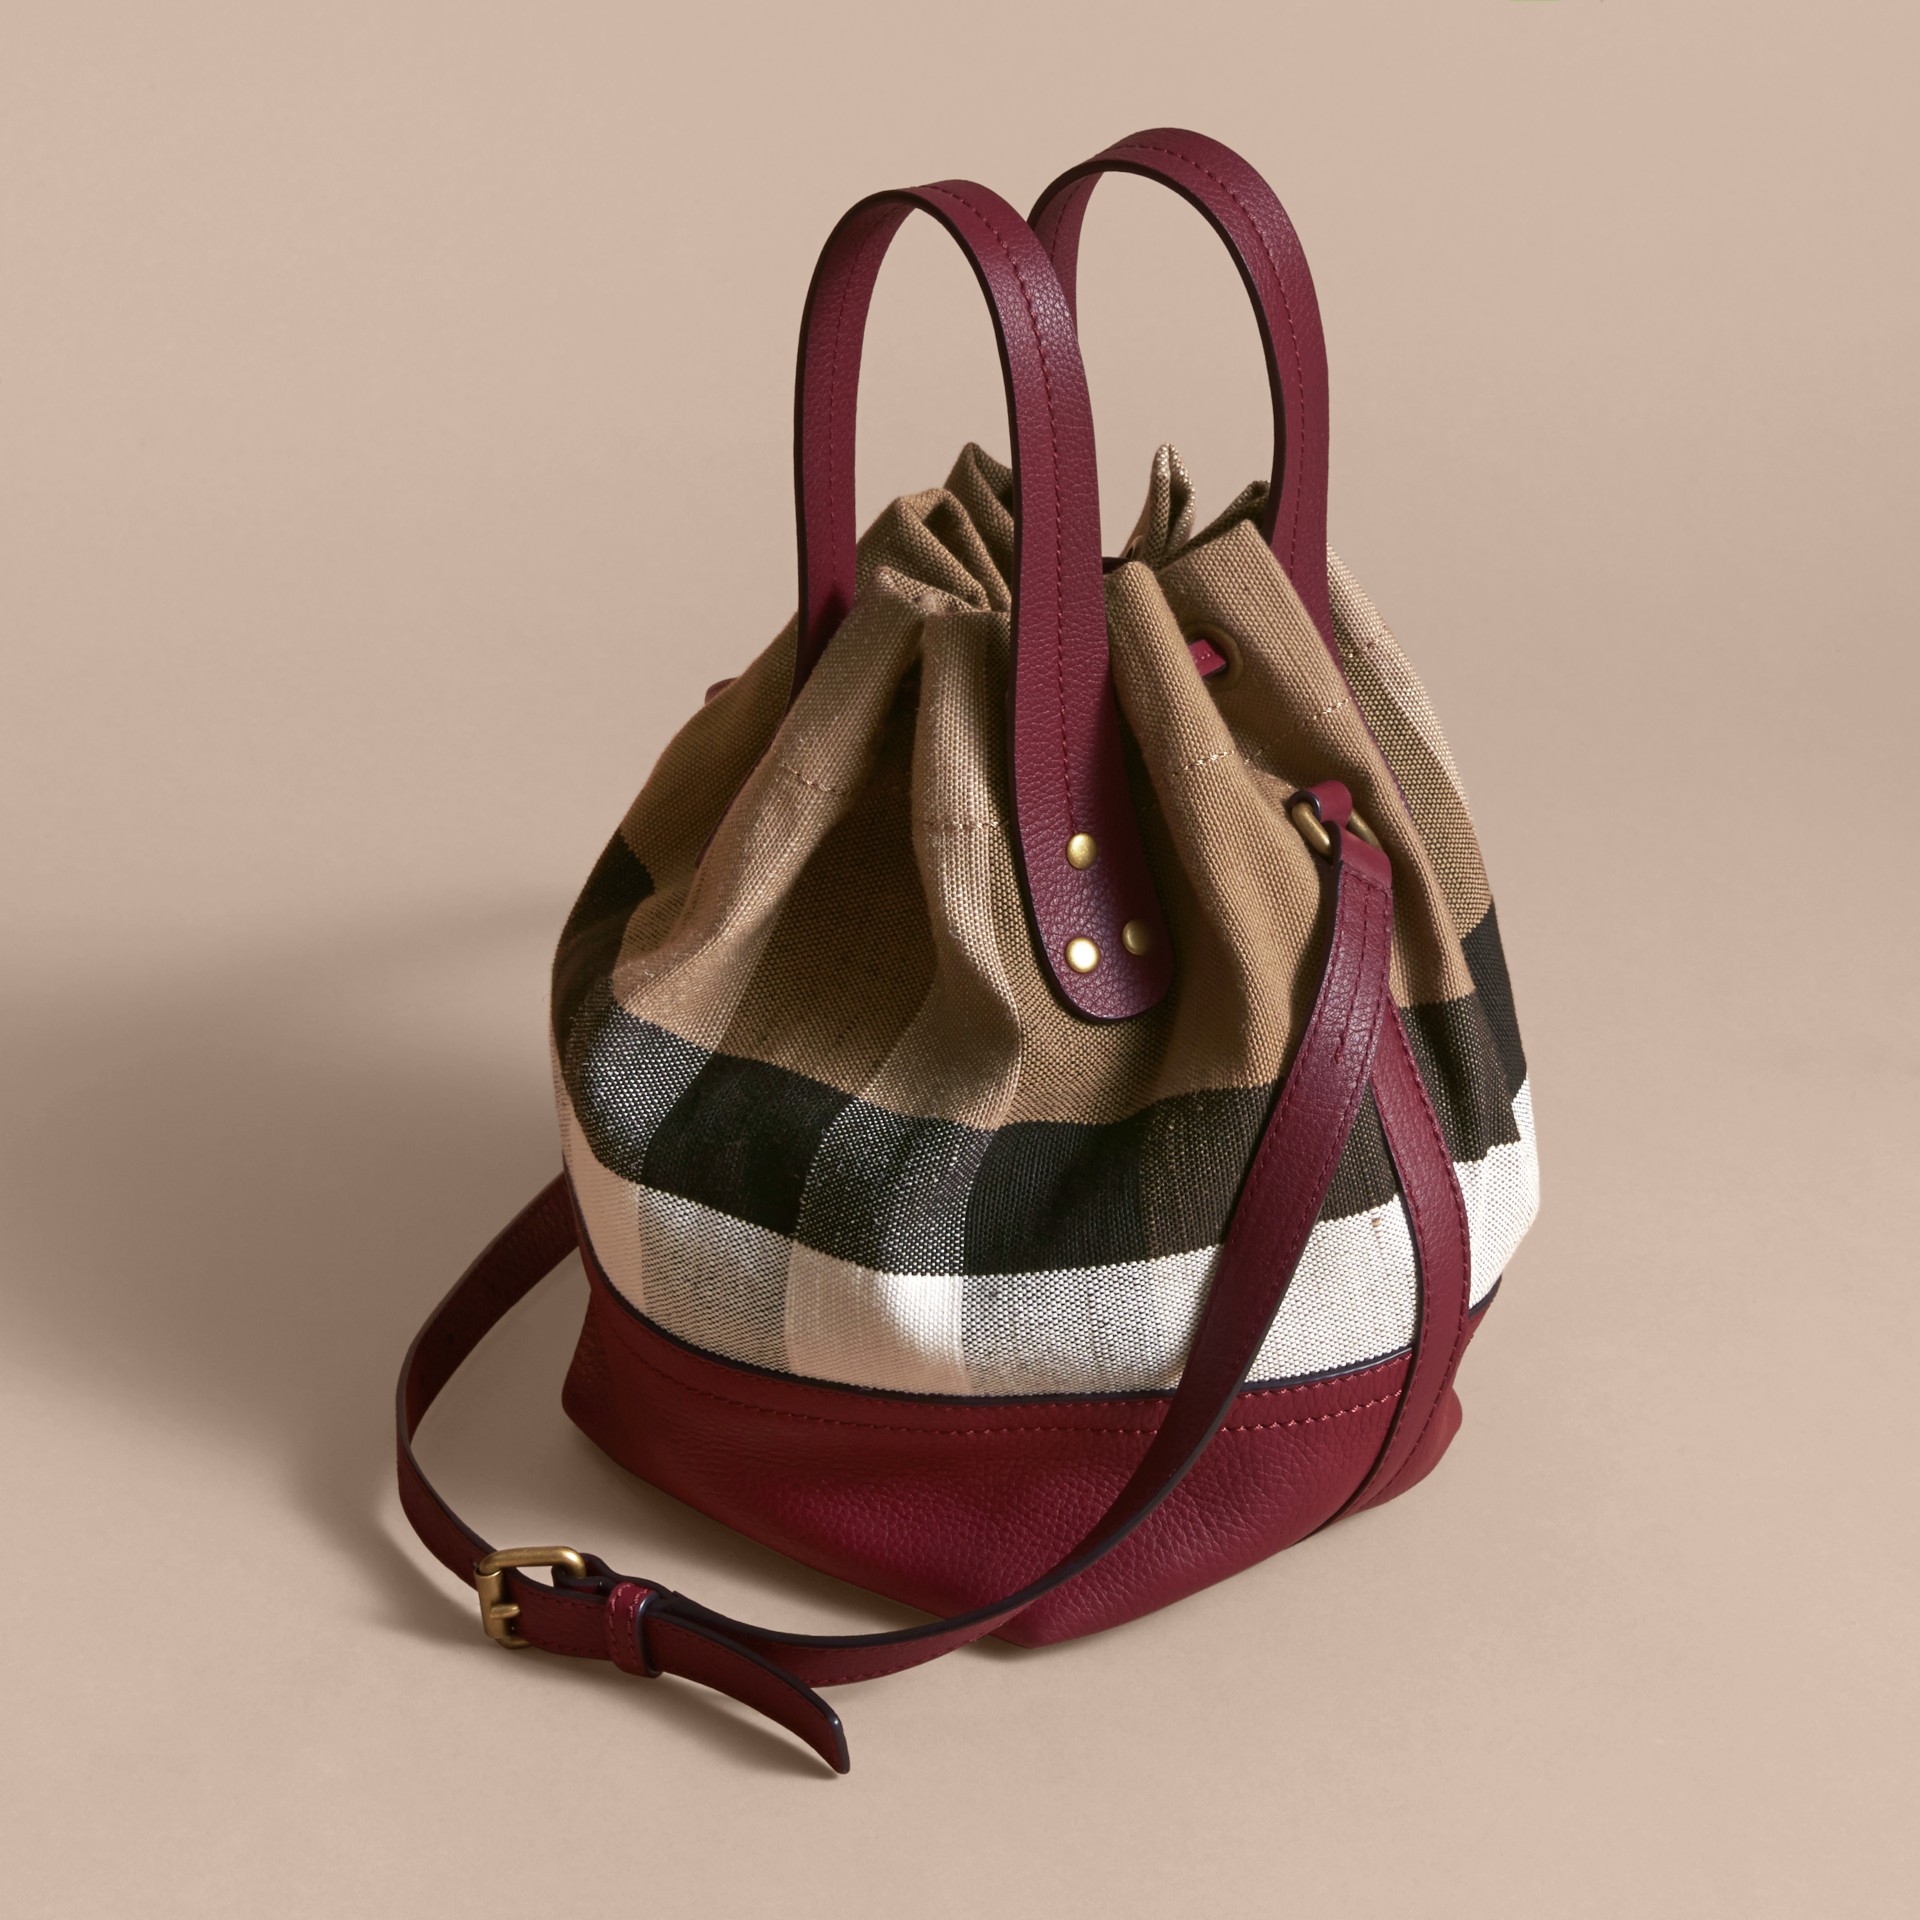 Small Canvas Check and Leather Bucket Bag in Burgundy Red - Women | Burberry